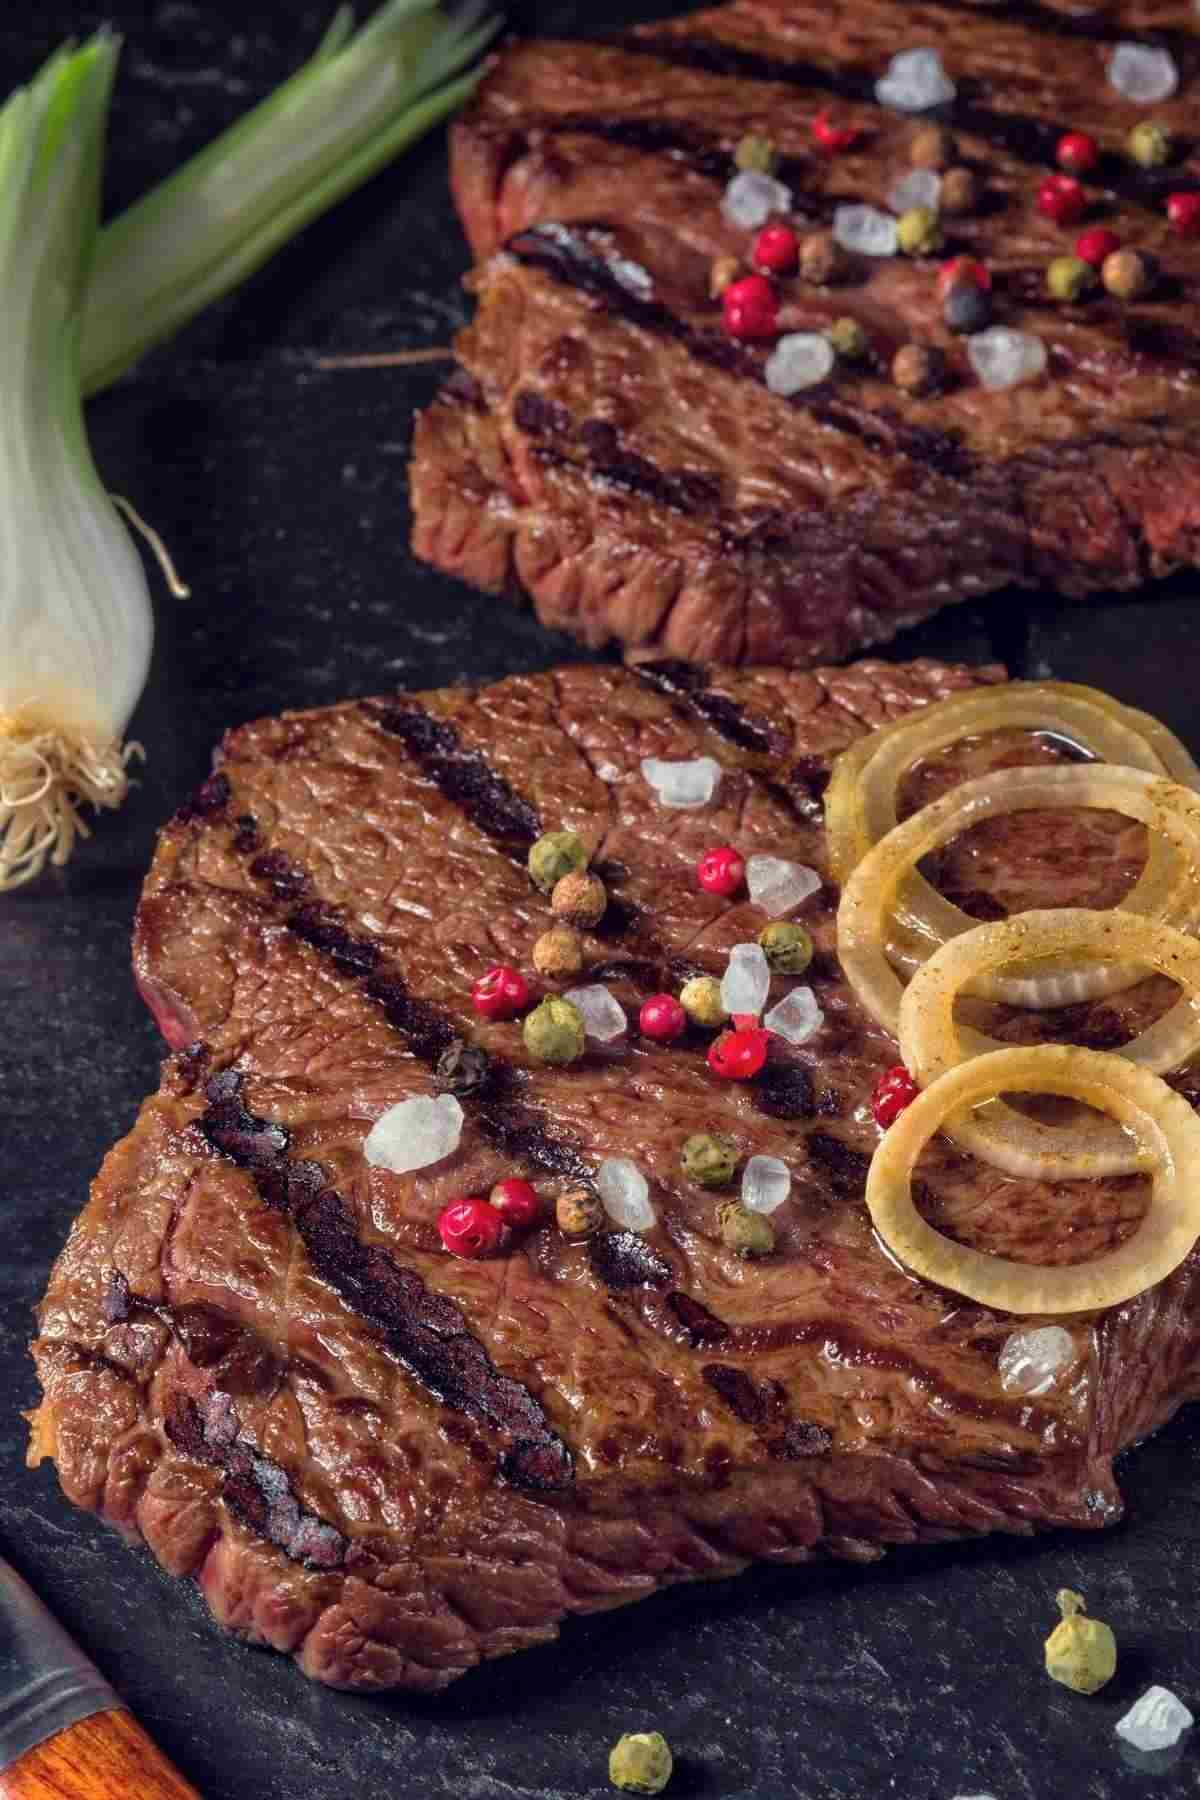 Grilled Beef Steak is tender, juicy, and flavorful. This steak is grilled to caramelized perfection for a satisfying steak dinner you can easily prepare.